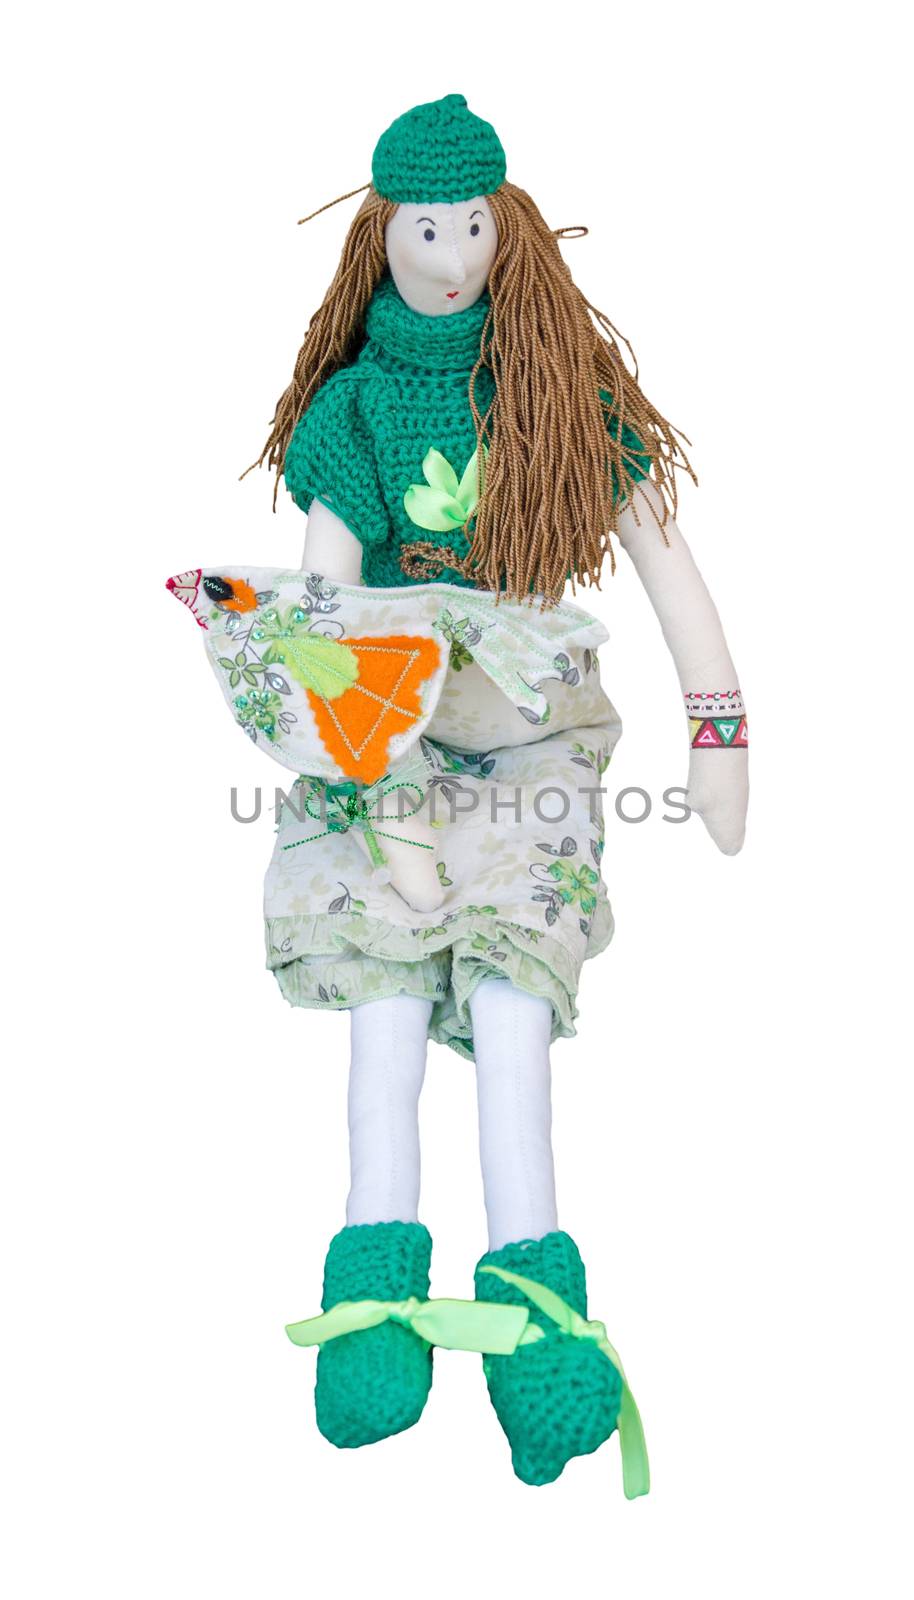 Handmade doll with a bird on the hand in a dress and sweater sit by pt-home